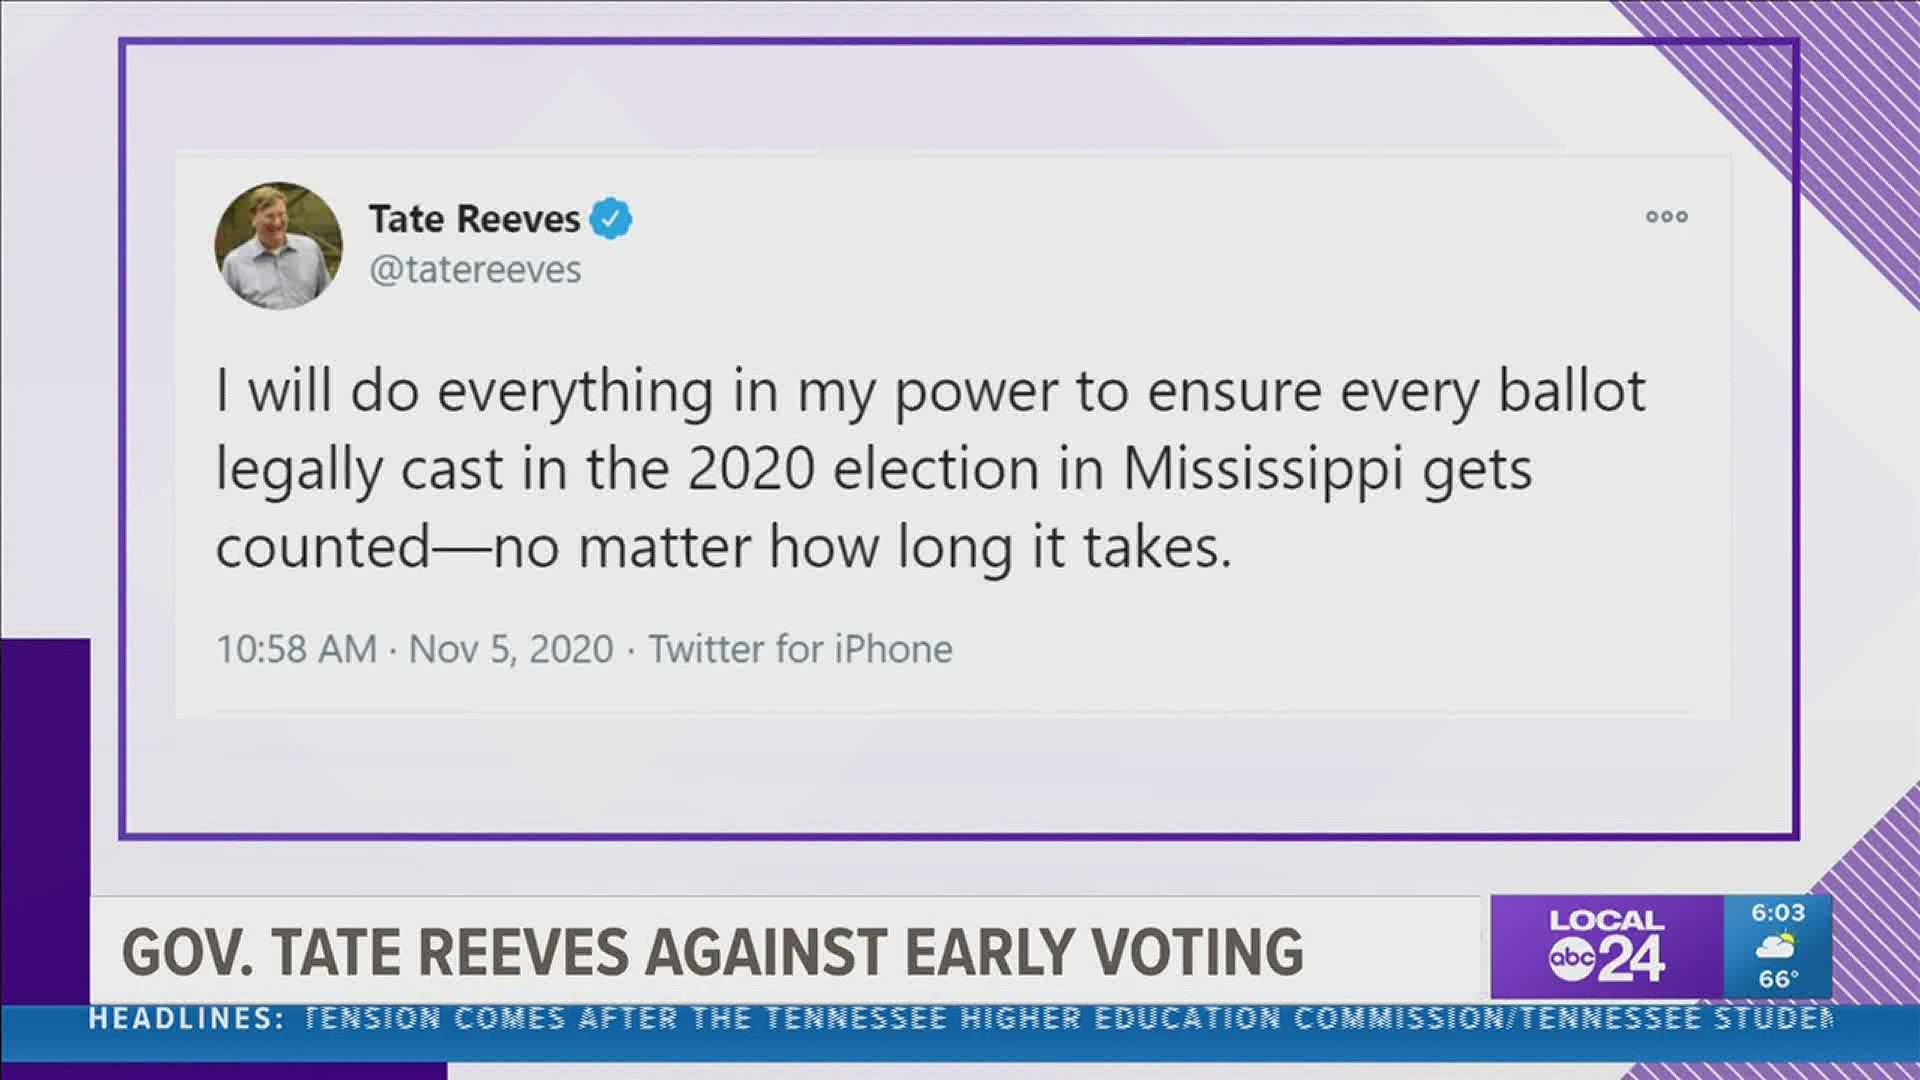 If Gov. Tate Reeves has his way, early voting won’t happen under his watch.